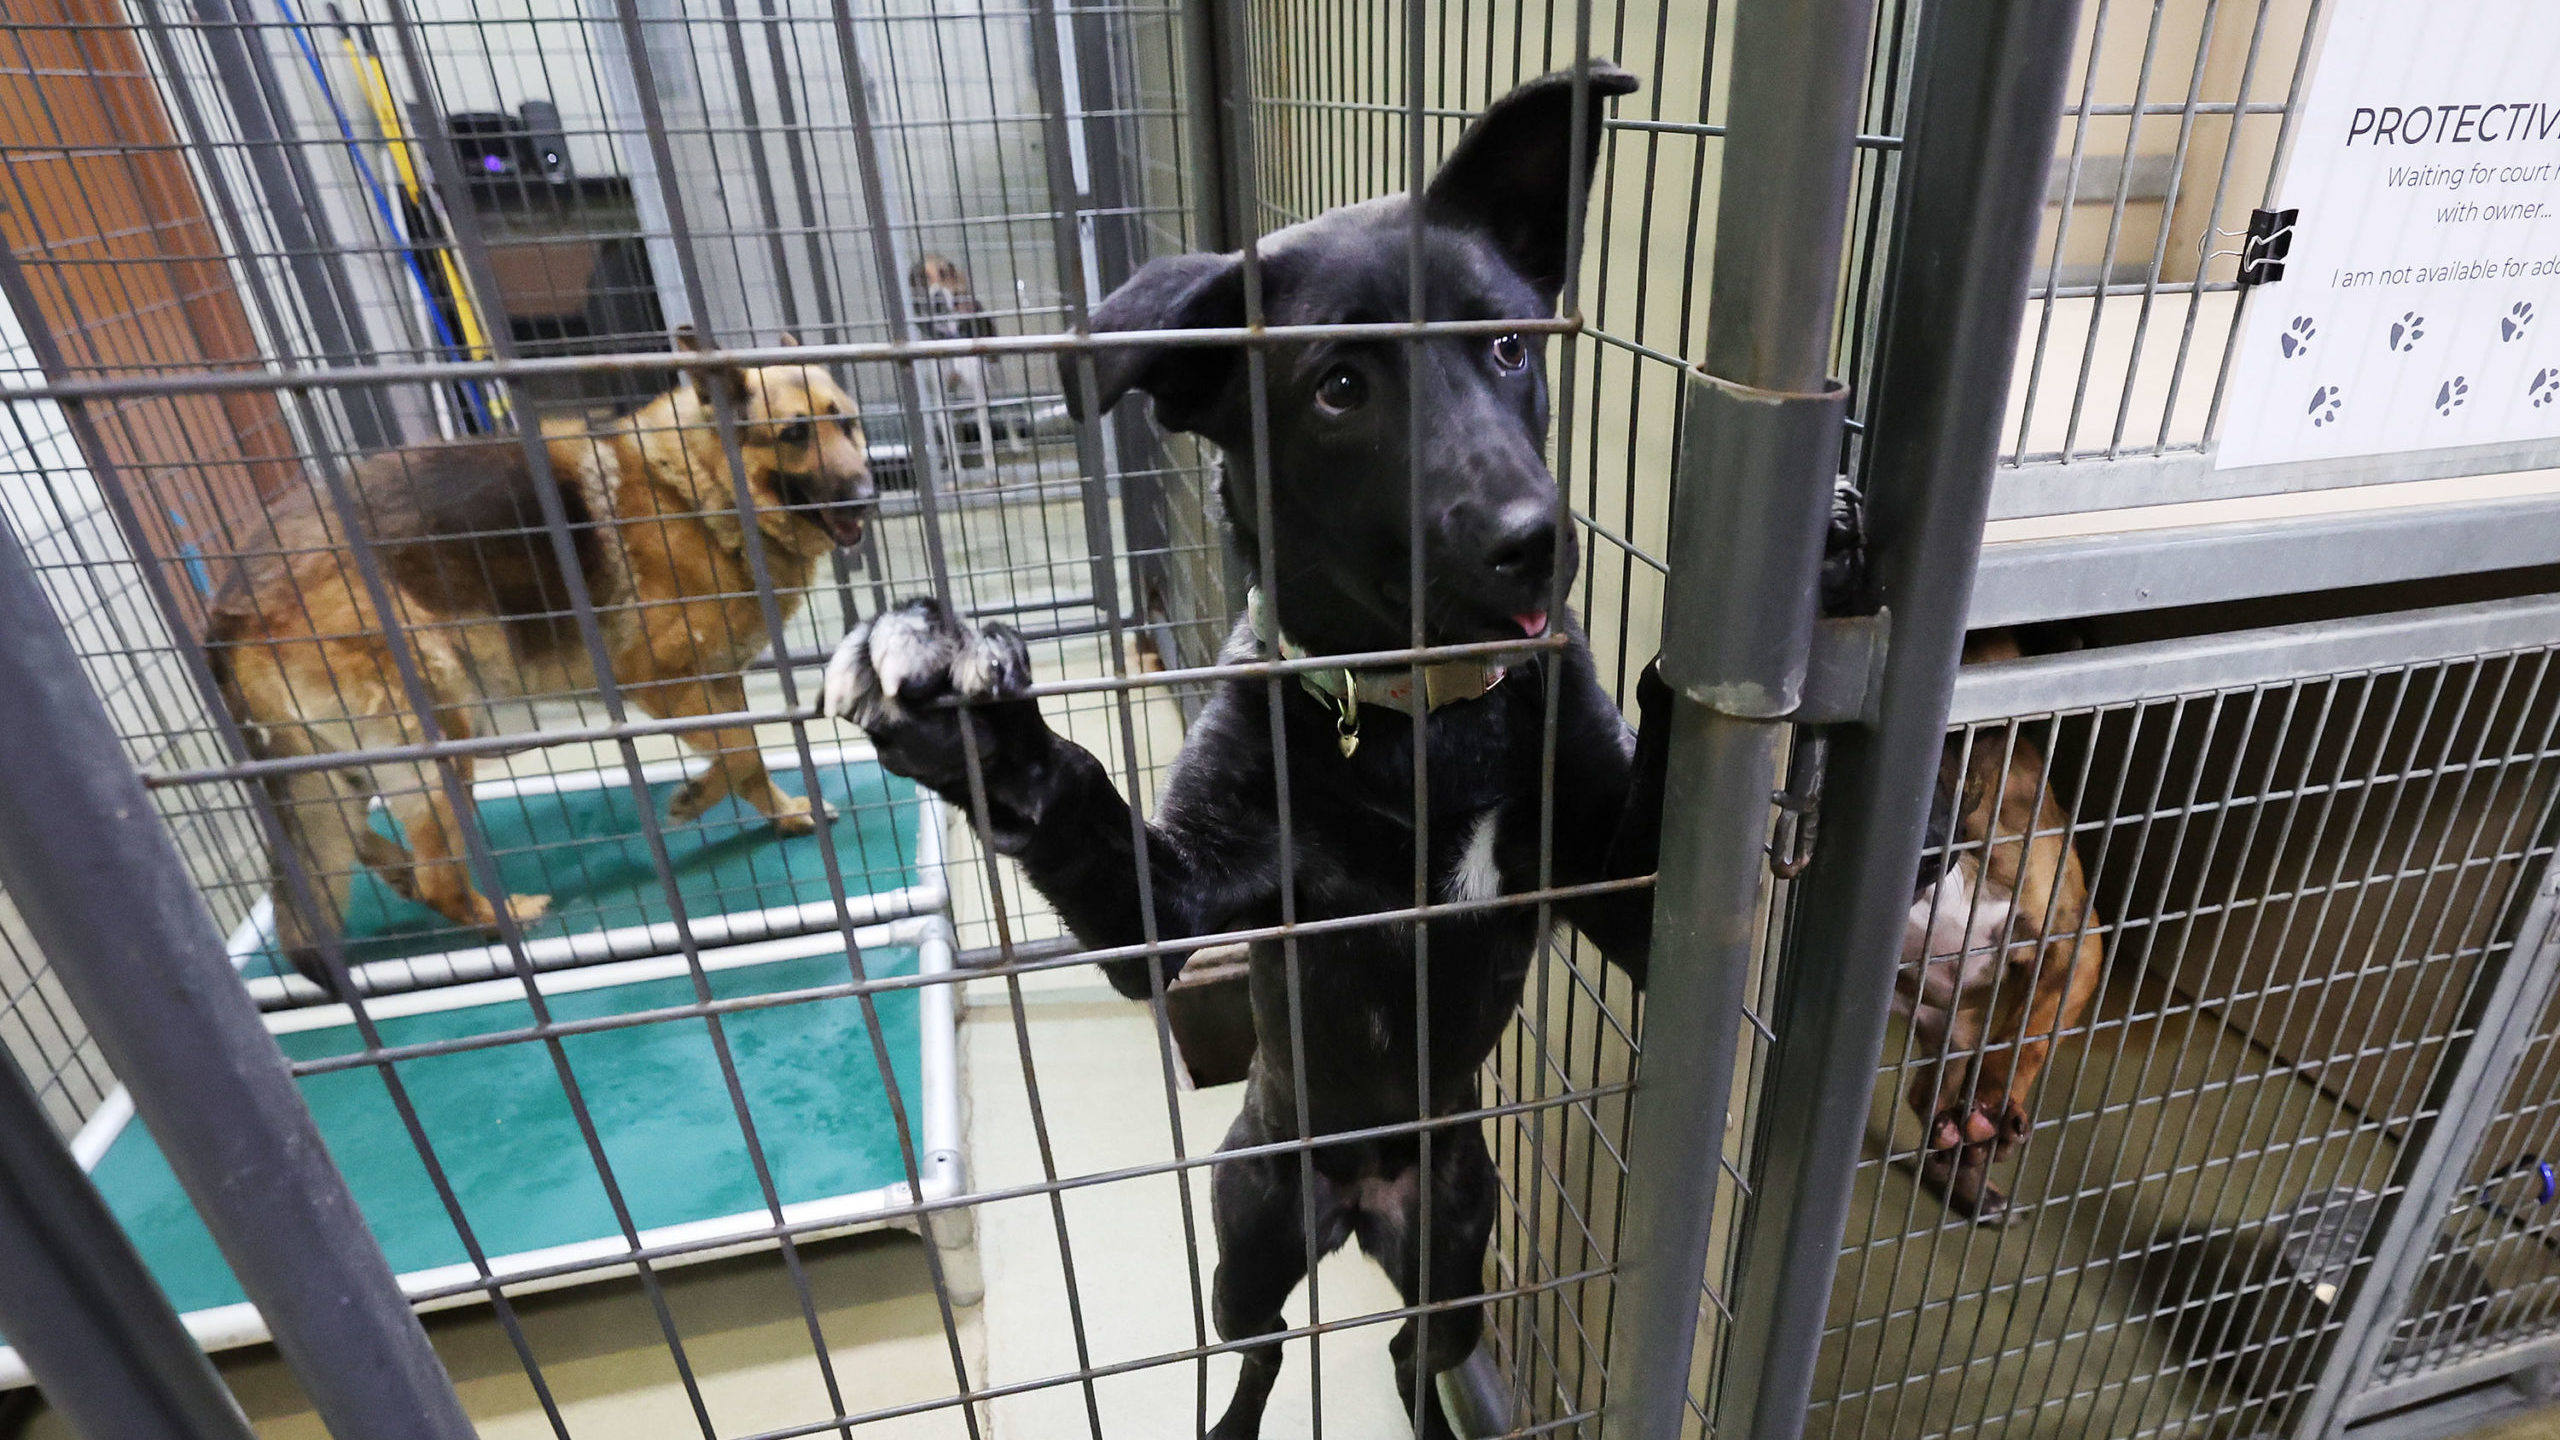 Animal shelters inundated, pushing capacity after new year